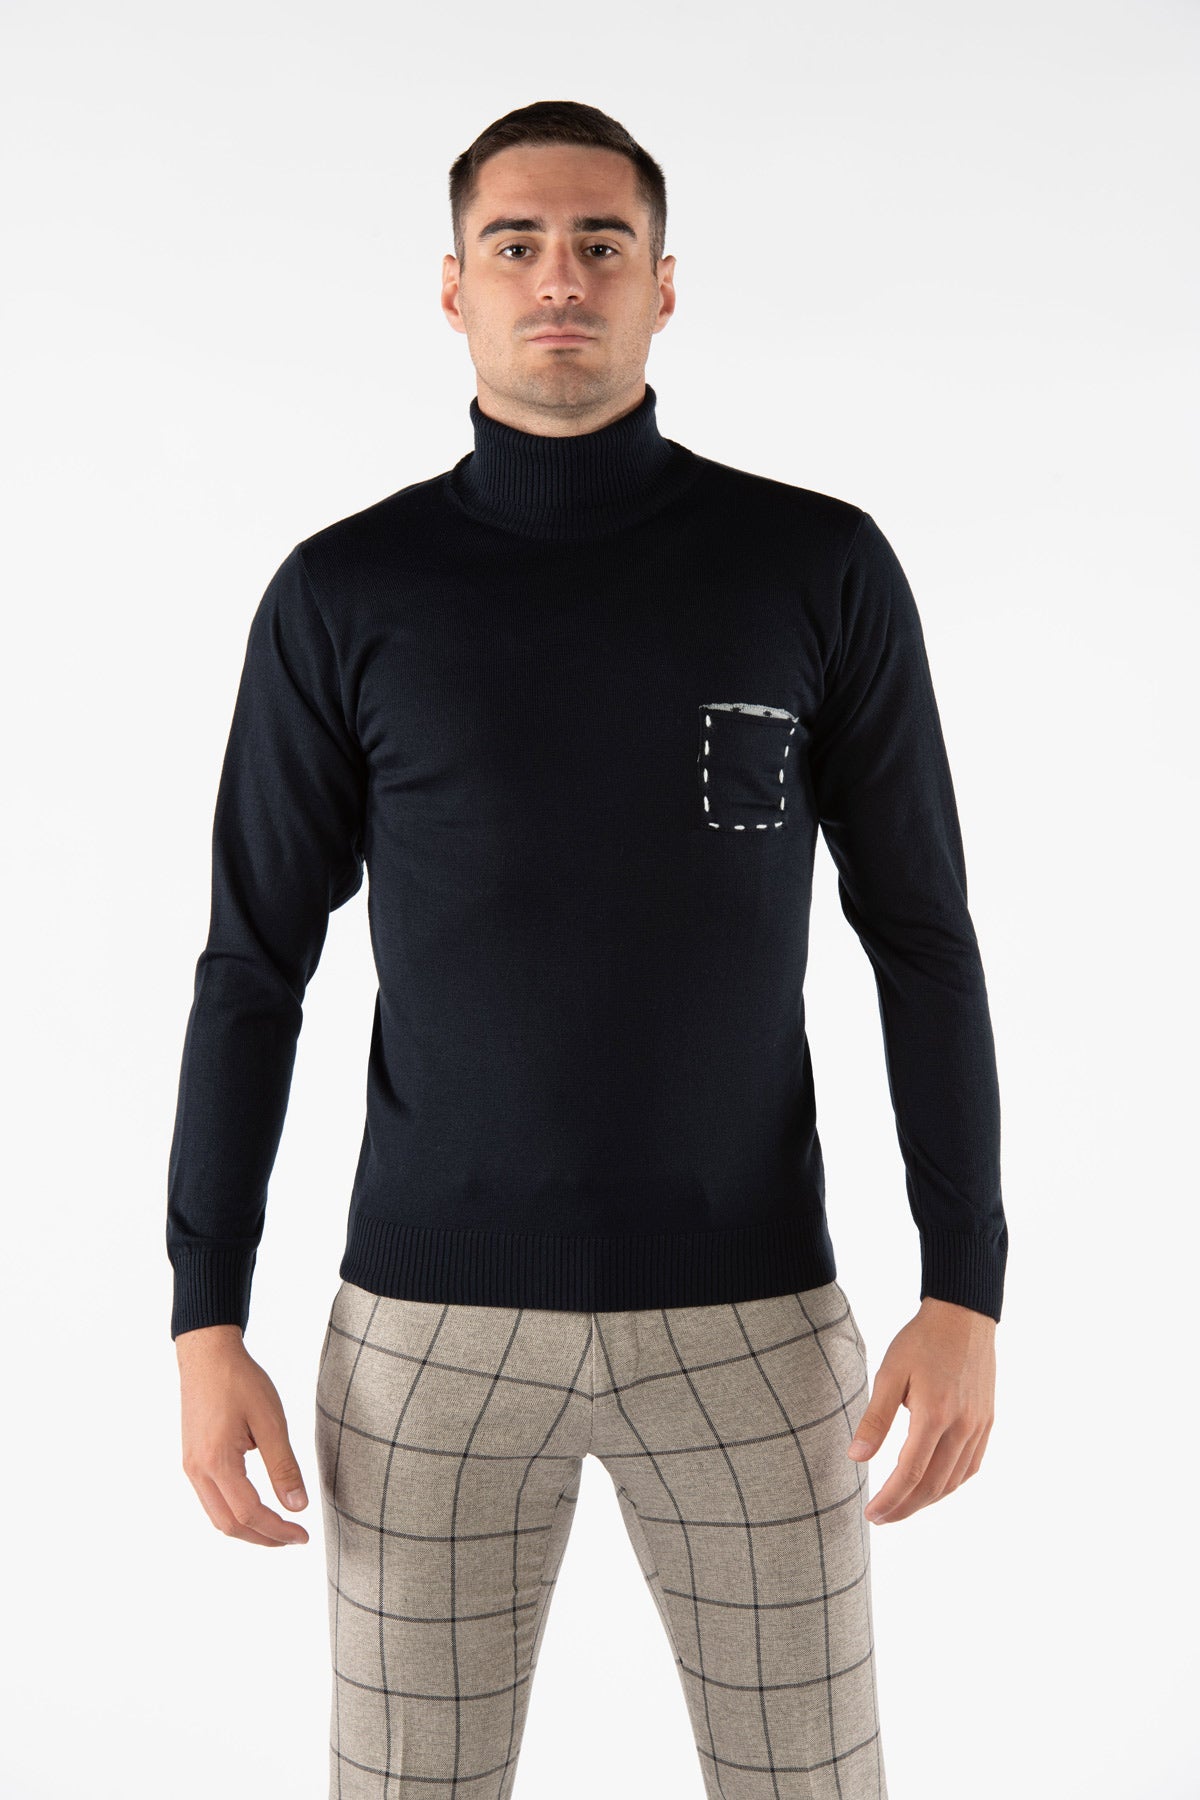 Phoenix turtleneck sweater with pocket and patches